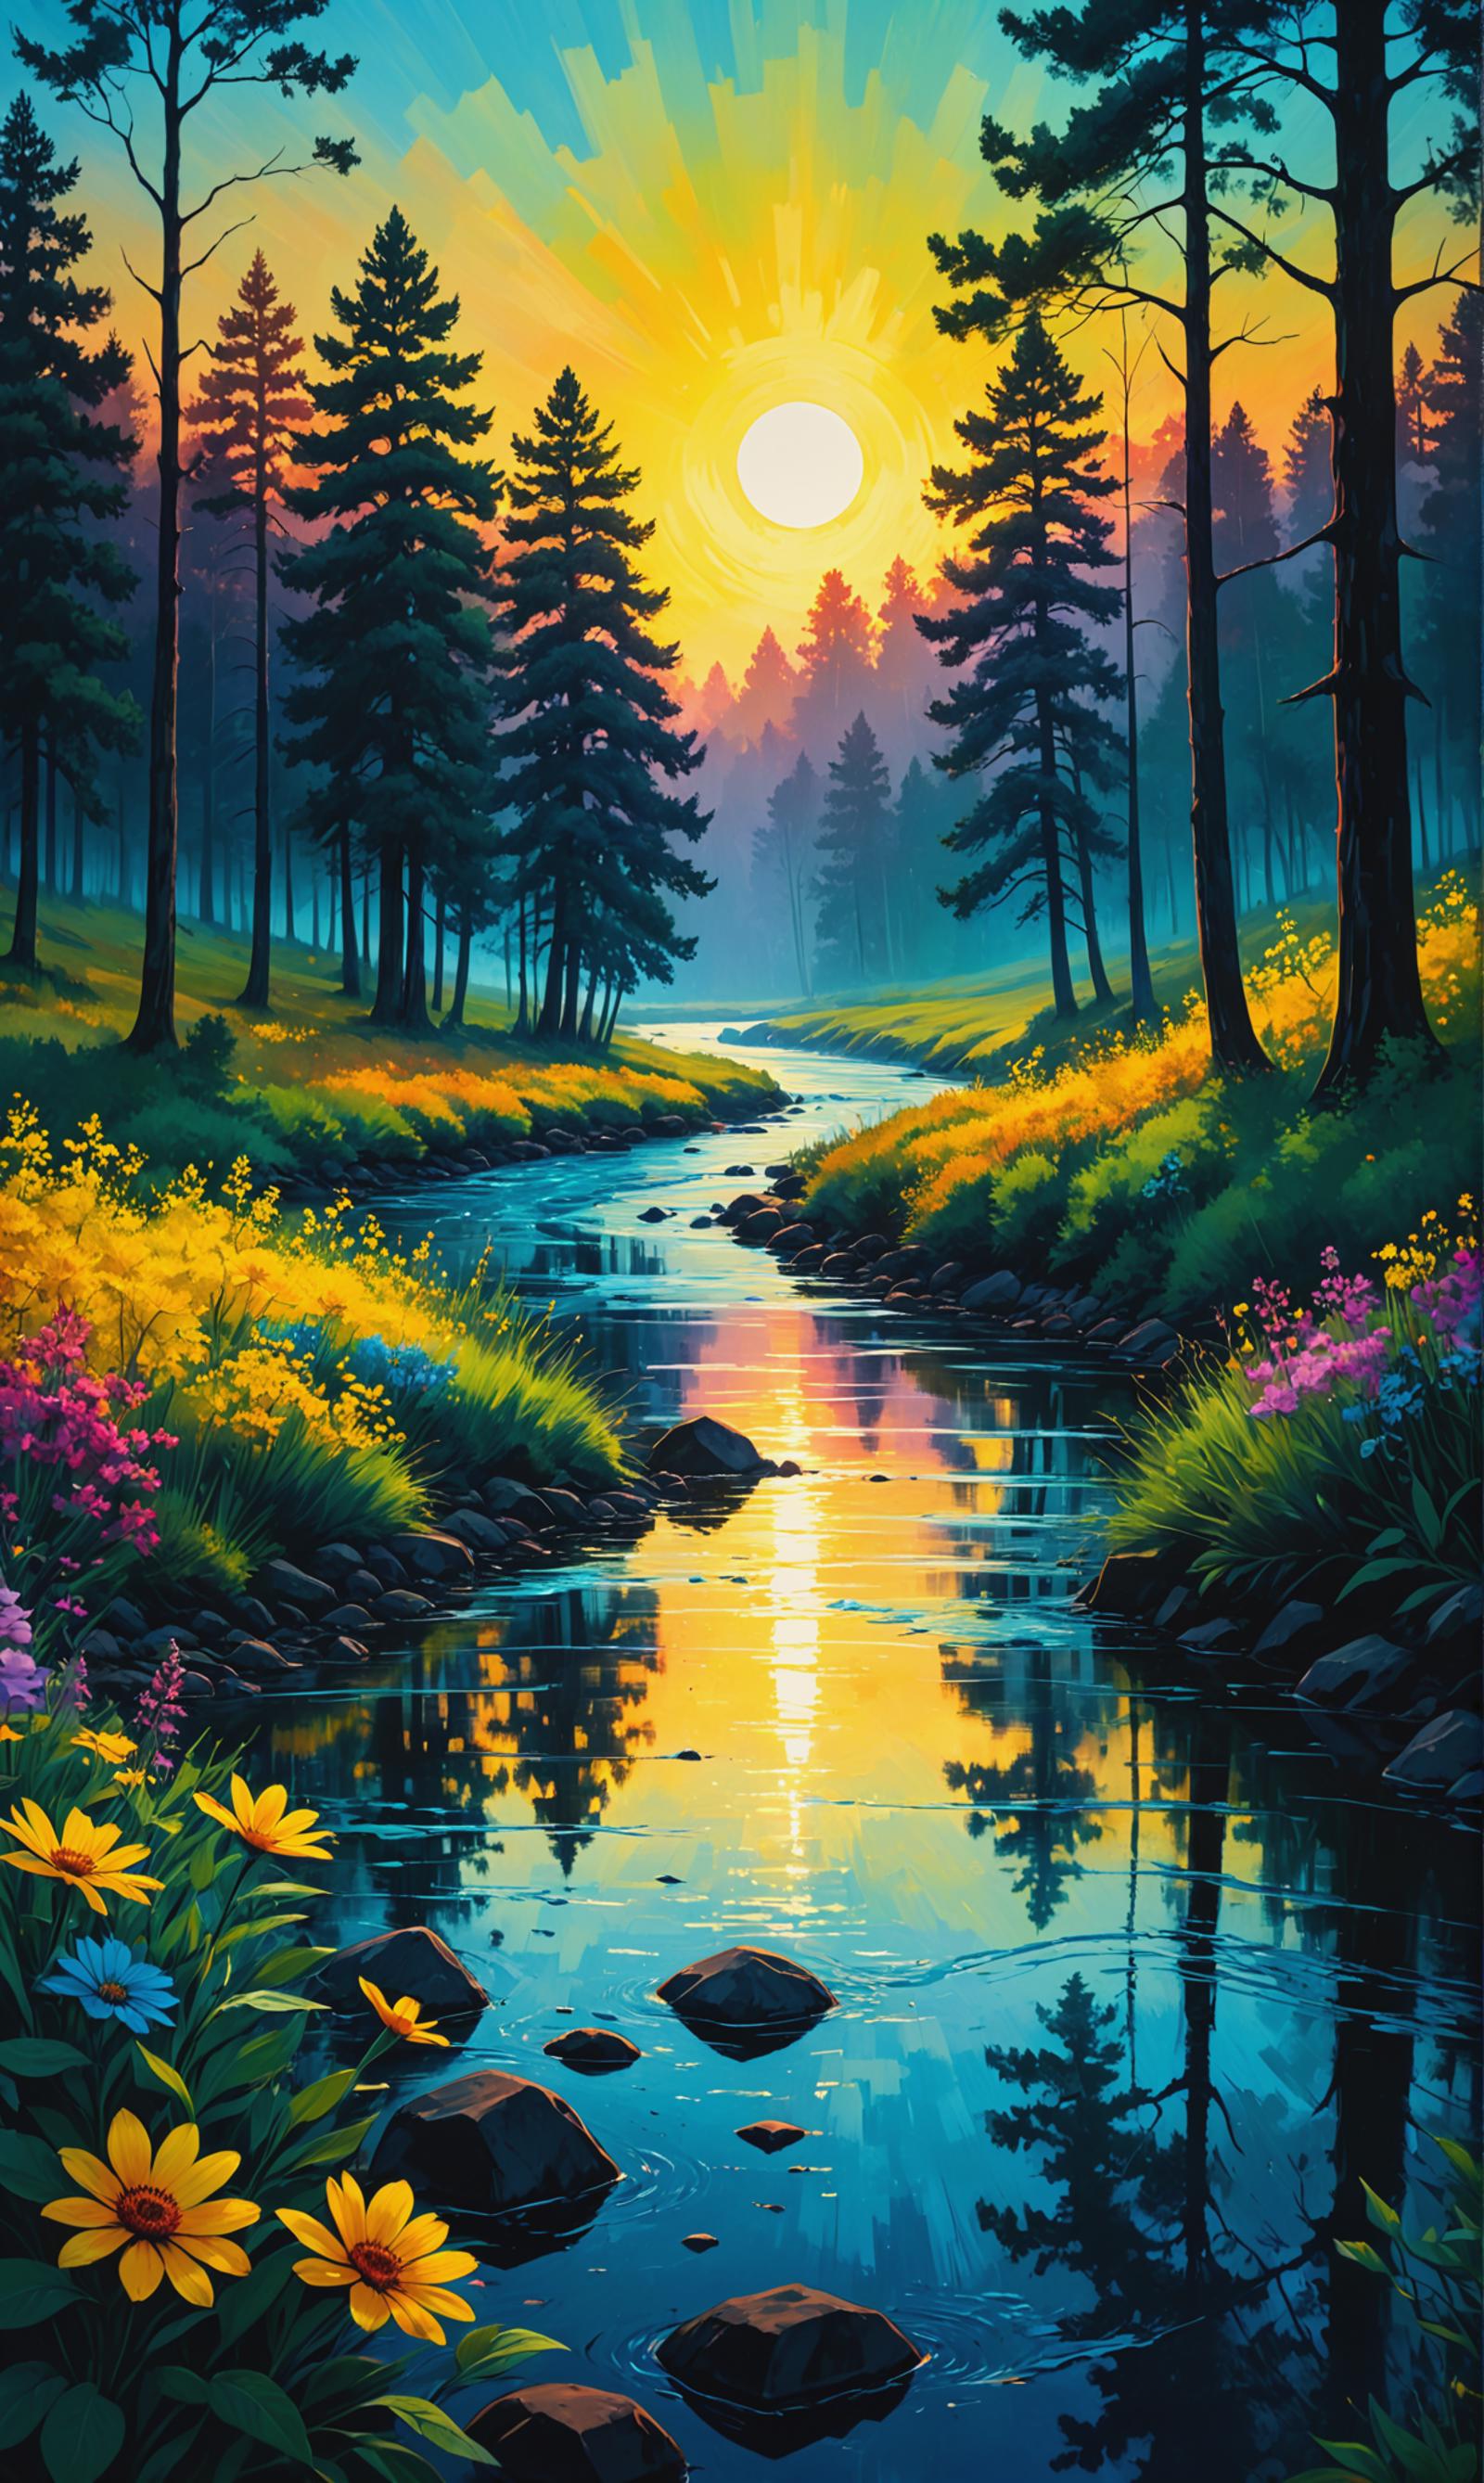 A beautiful painting of a sunlit forest river surrounded by trees, flowers, and rocks.